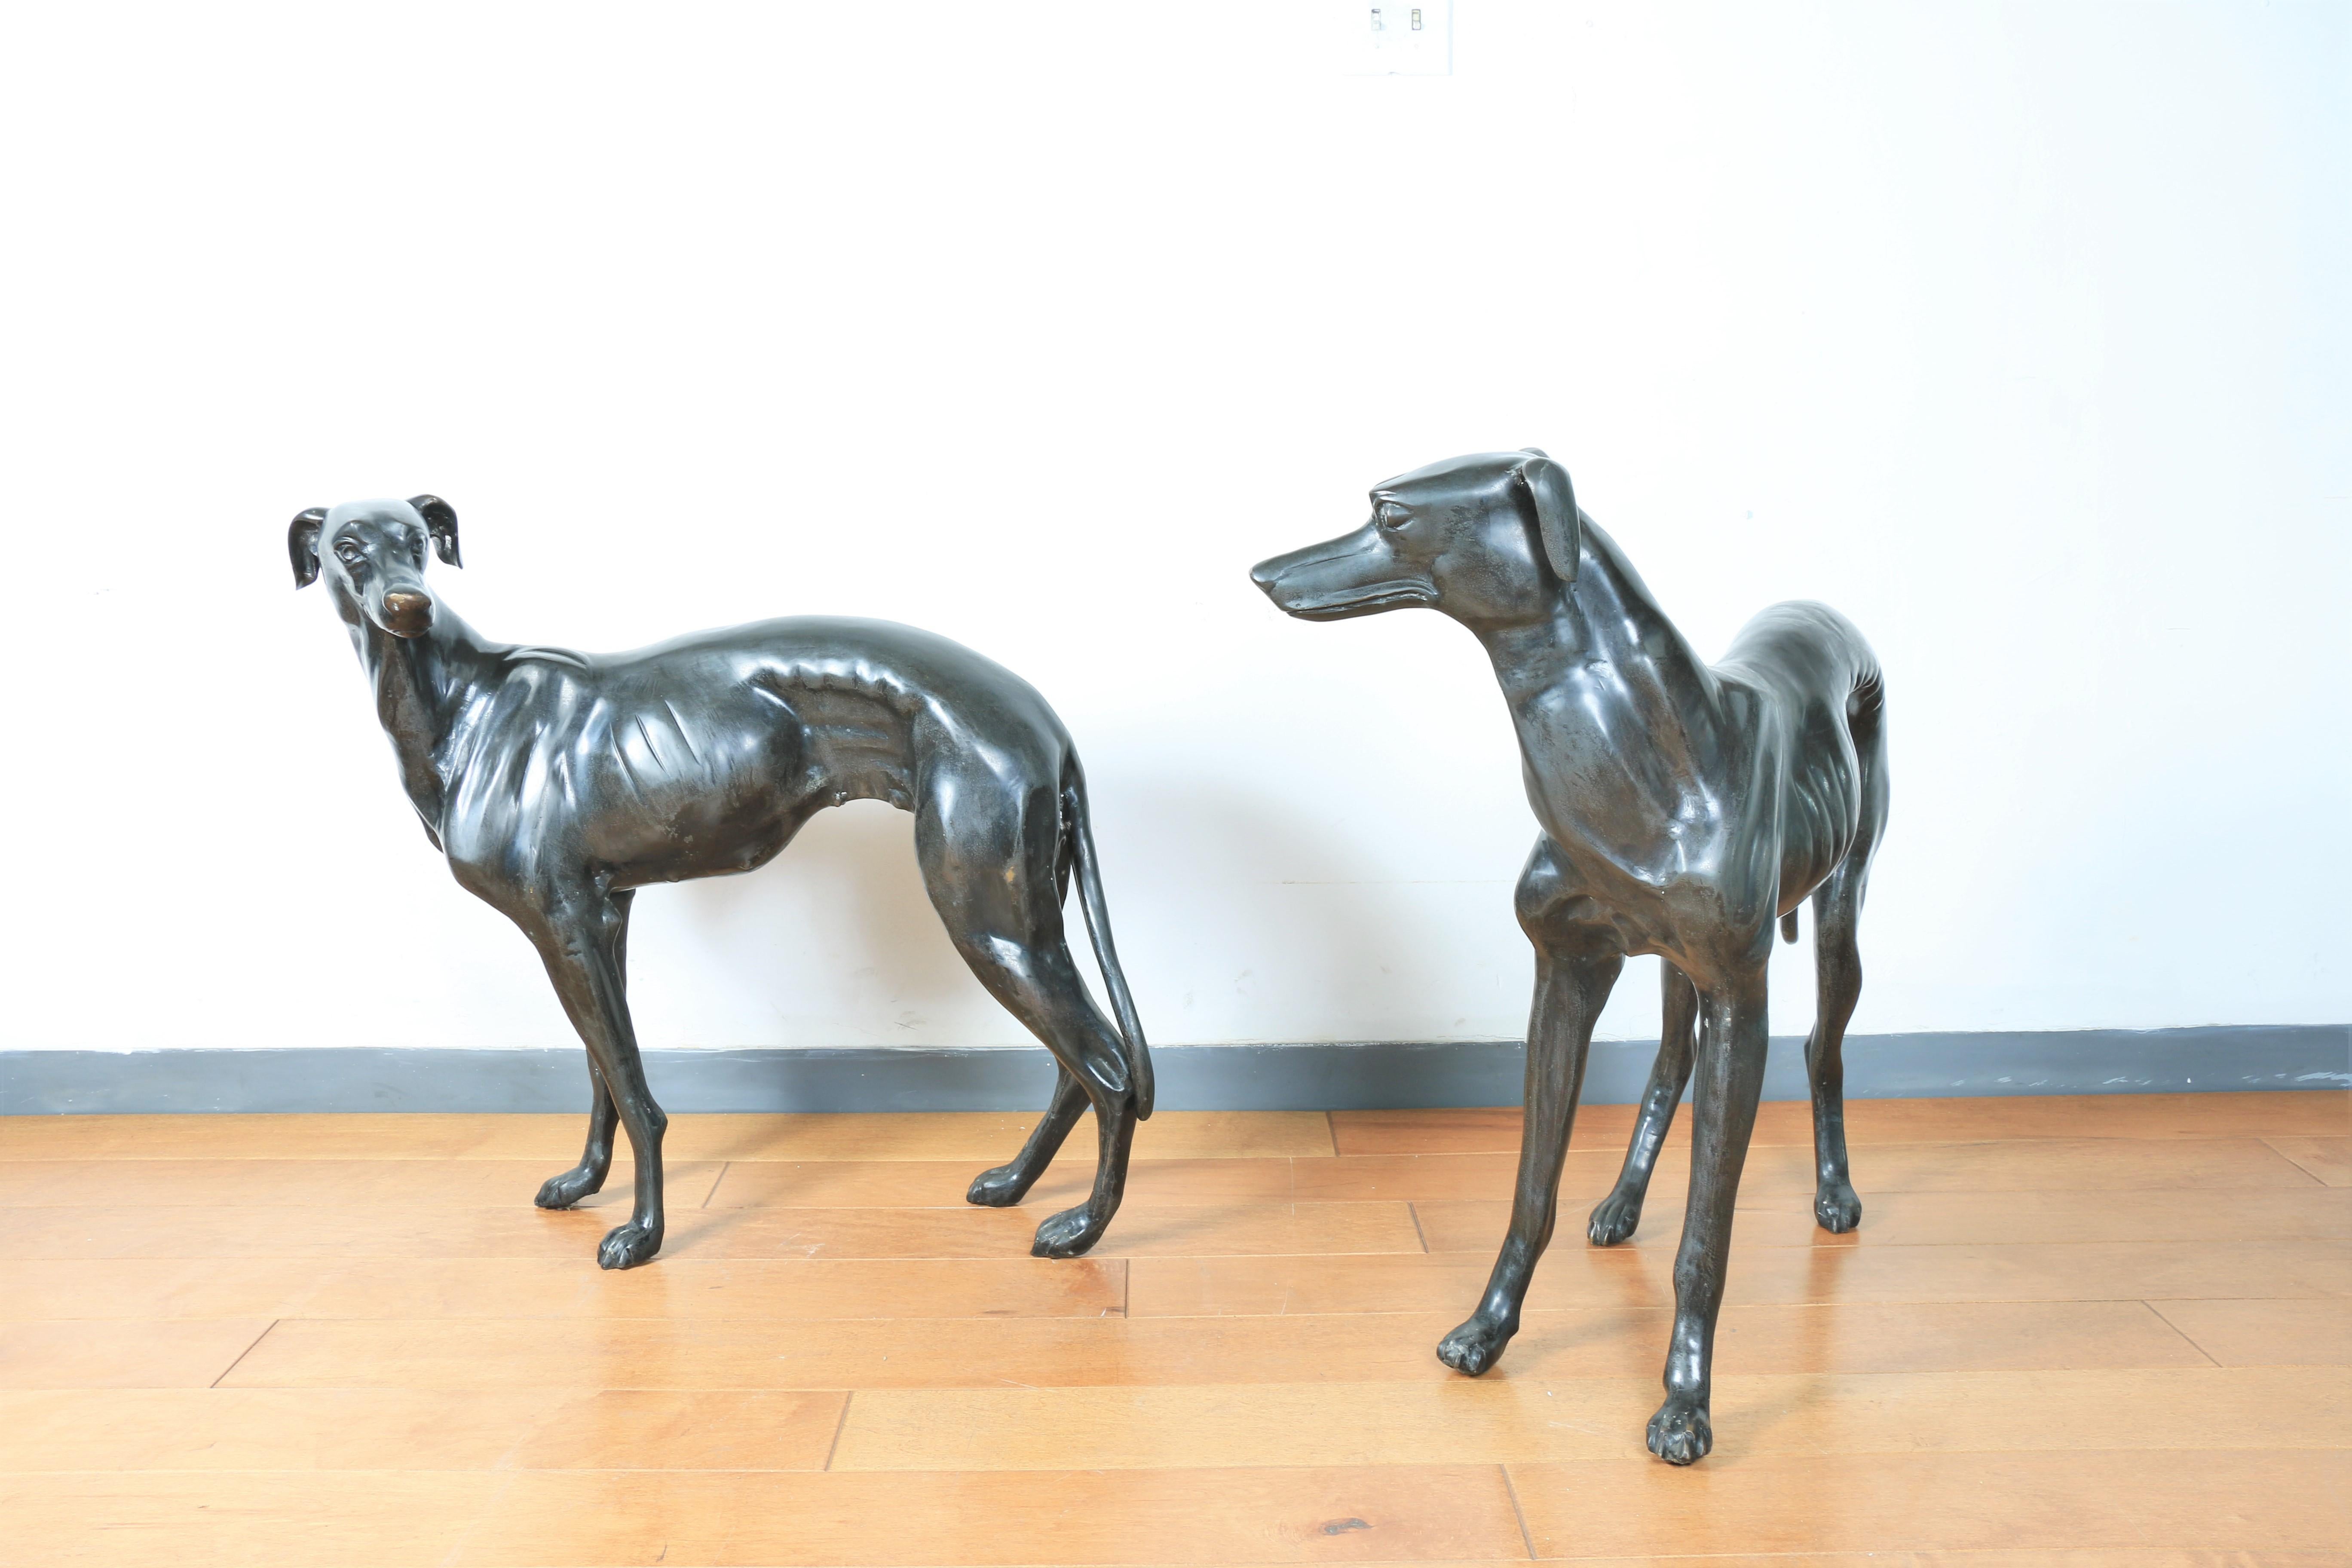 Gorgeous pair of elegant bronze greyhound dog statues in excellent condition. No damages or broken parts. Both dogs are great accent pieces for any home.